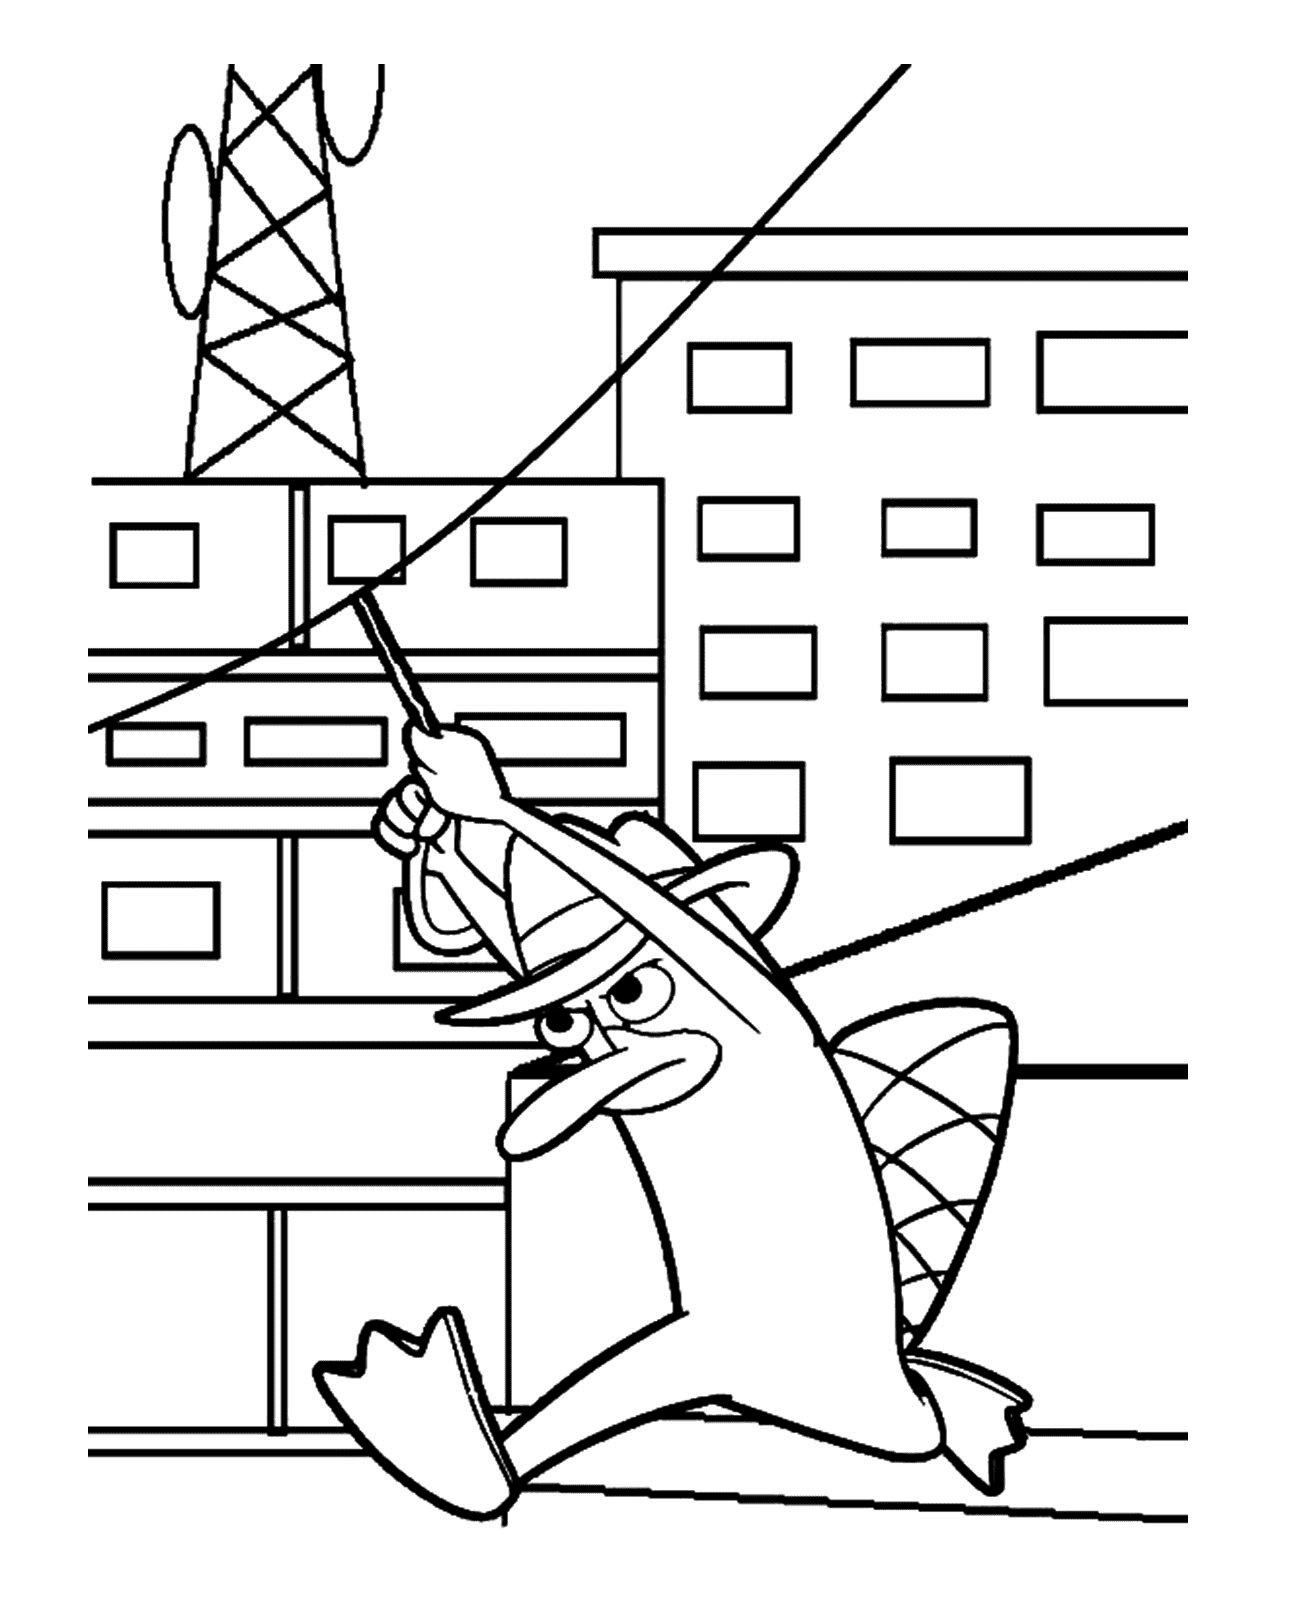 baby perry the platypus coloring pages